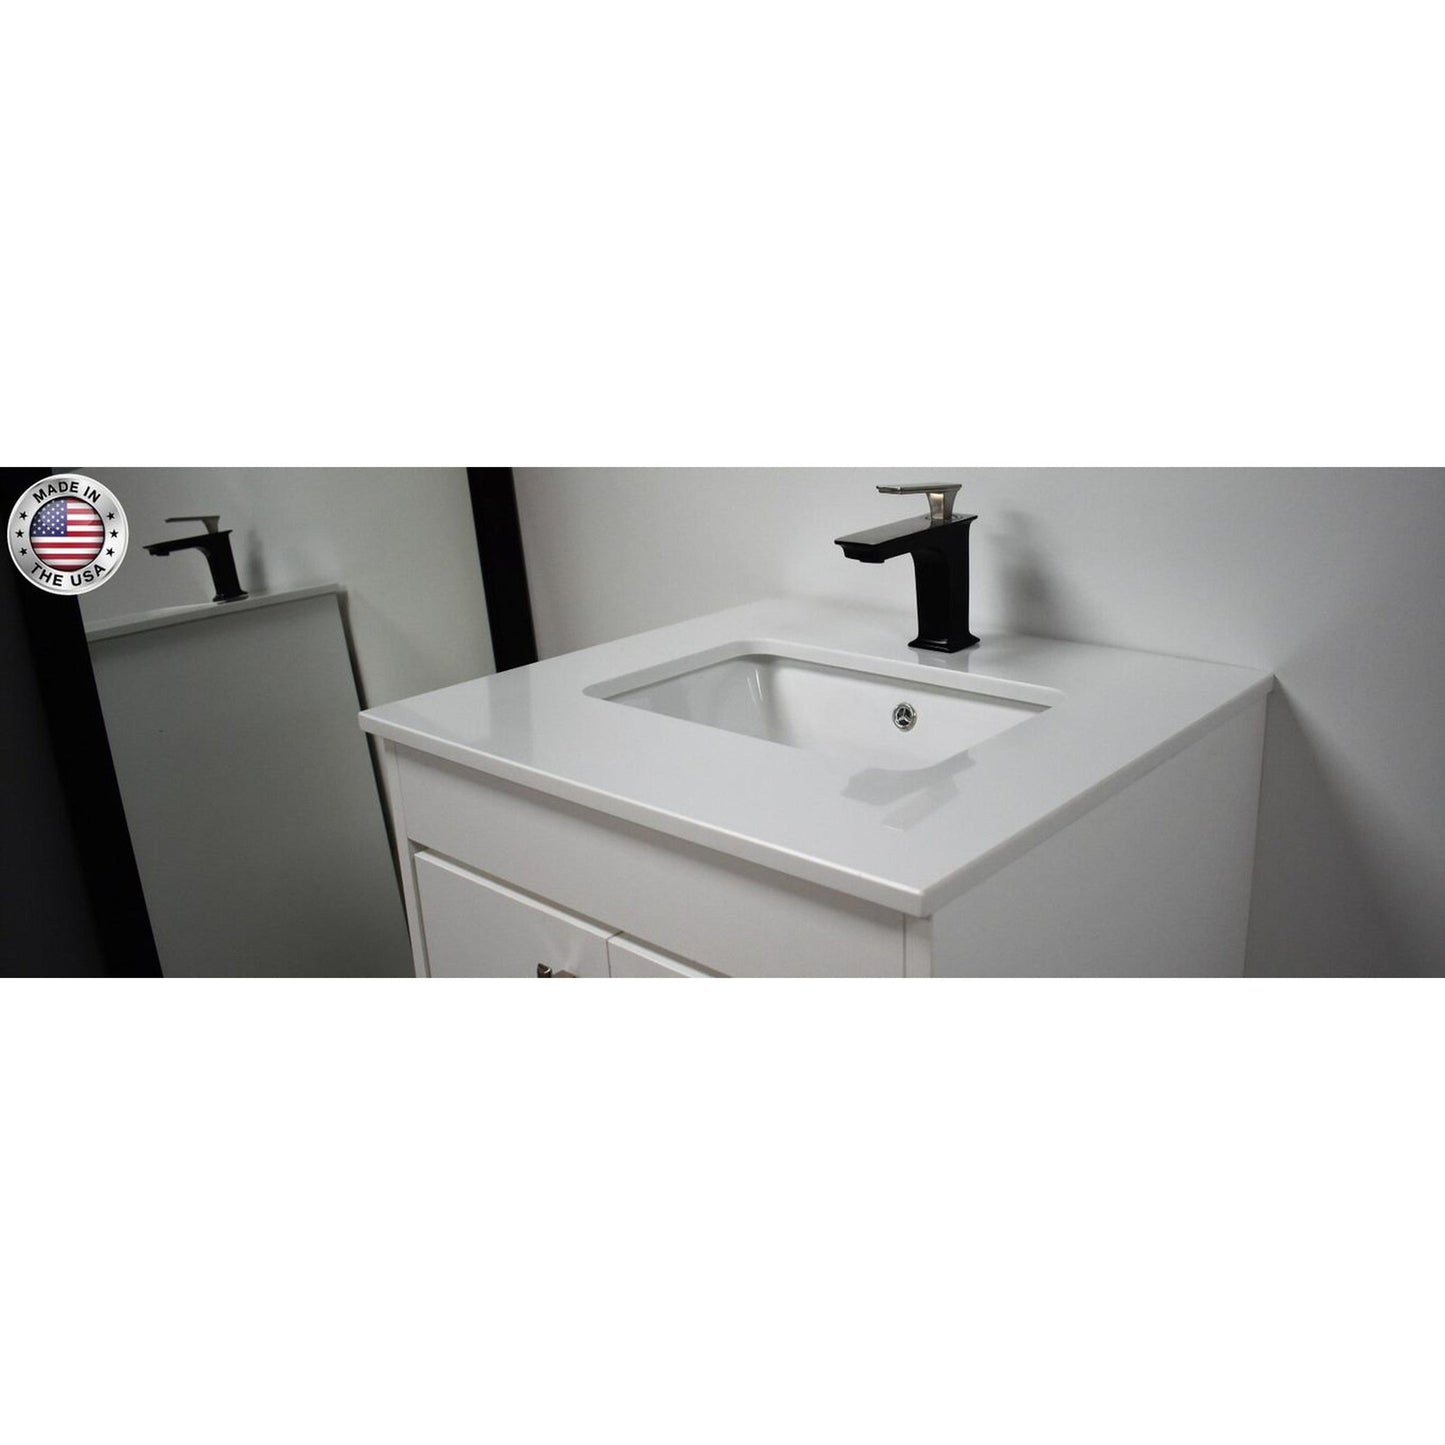 Volpa USA Capri 24" x 22" White Freestanding Modern Bathroom Vanity With Preinstalled Undermount Sink And White Microstone Top With Brushed Nickel Edge Handles